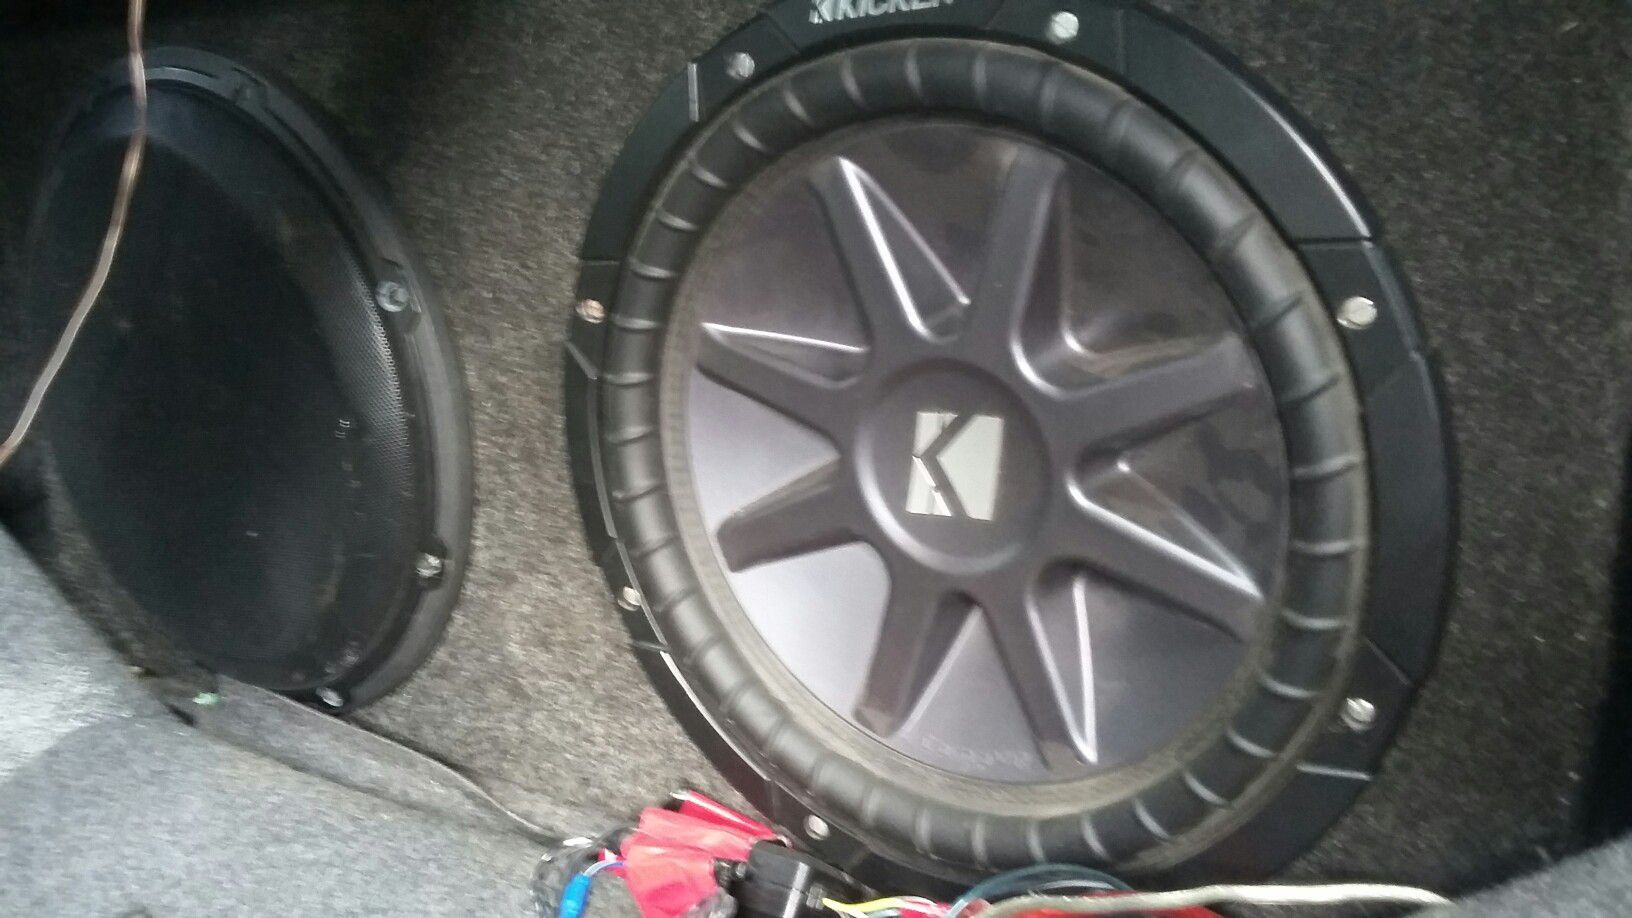 2 12"in subwoofers